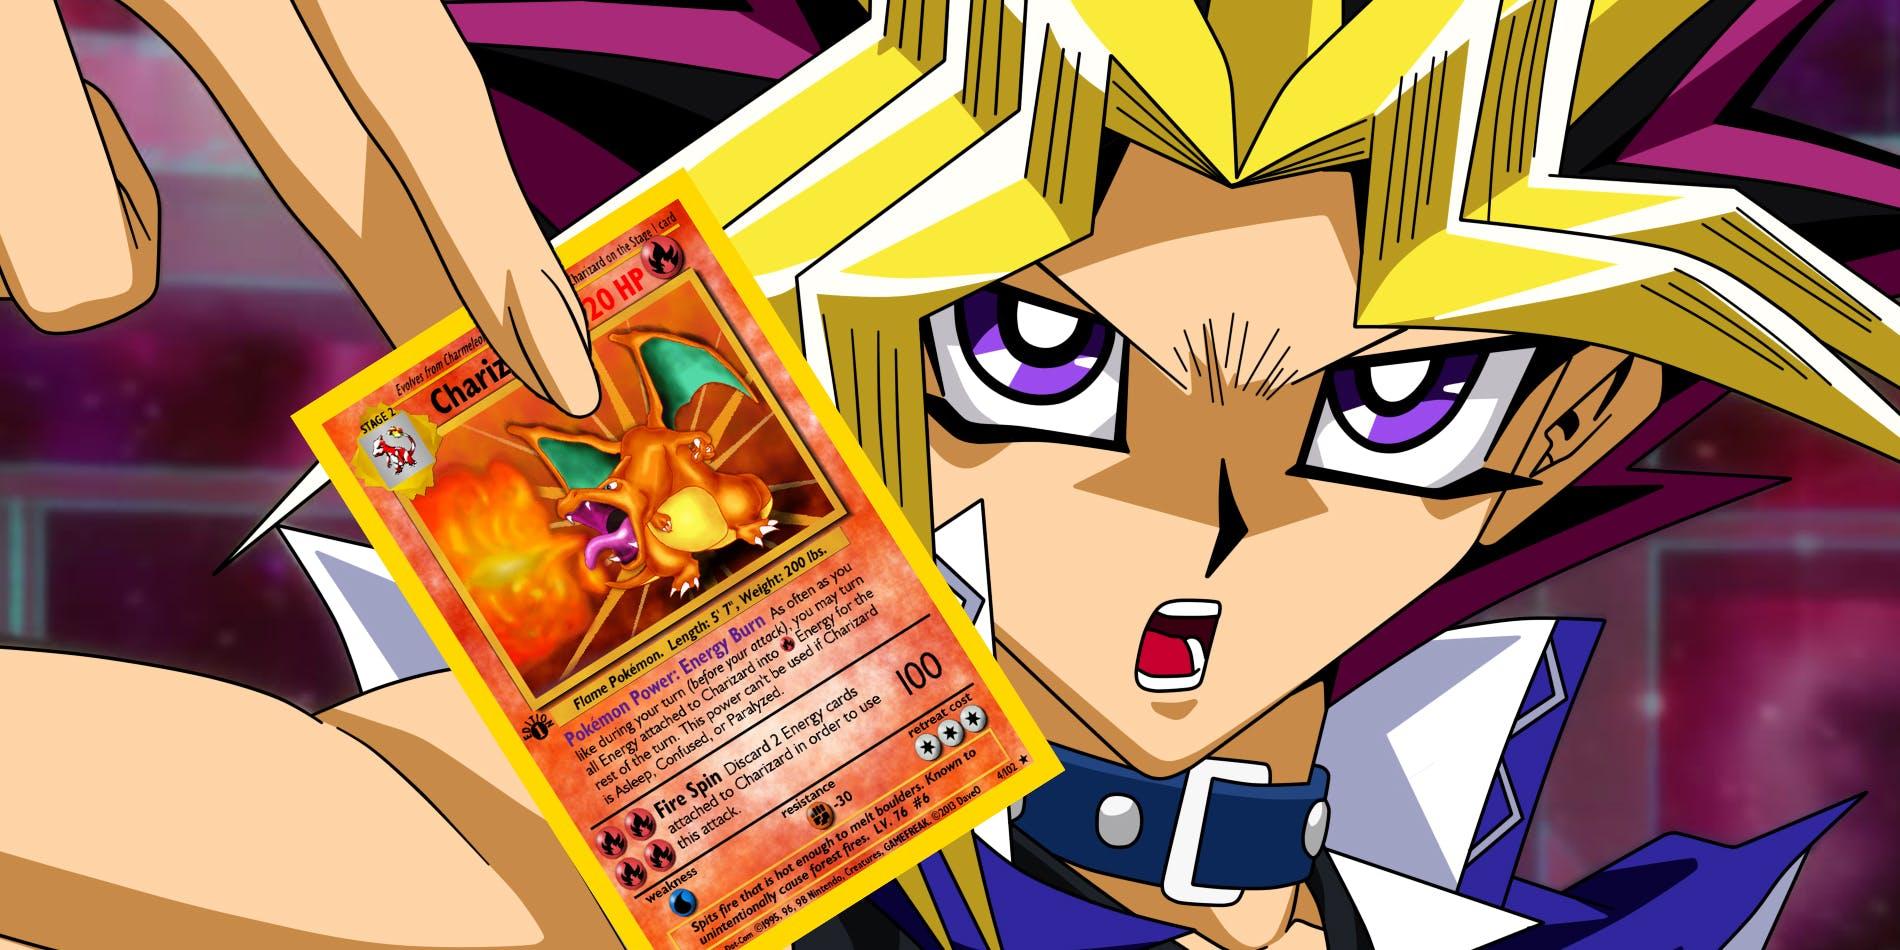 Yu Gi Oh! Cards With Mistakes You Can't Unsee